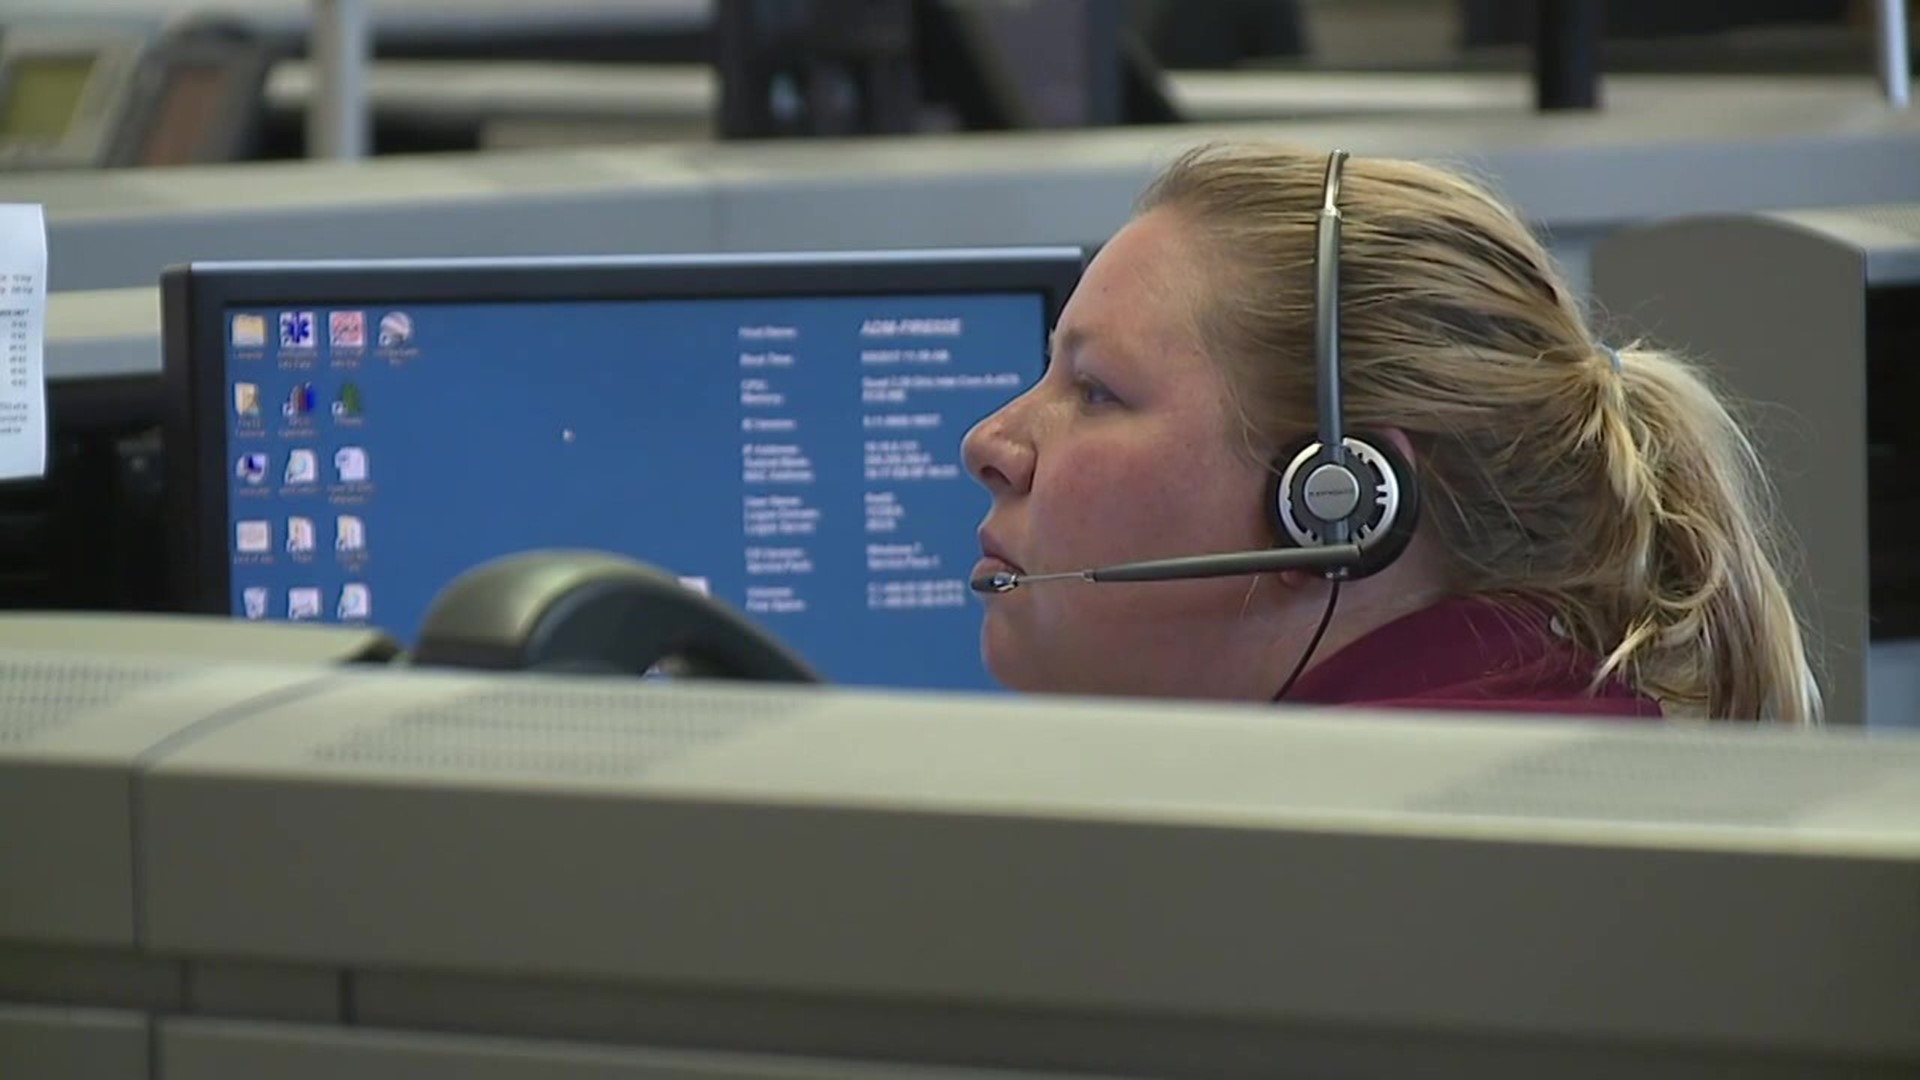 According to Dauphin County's director of public safety, 13 positions are open out of 53 total telecommunicator roles.